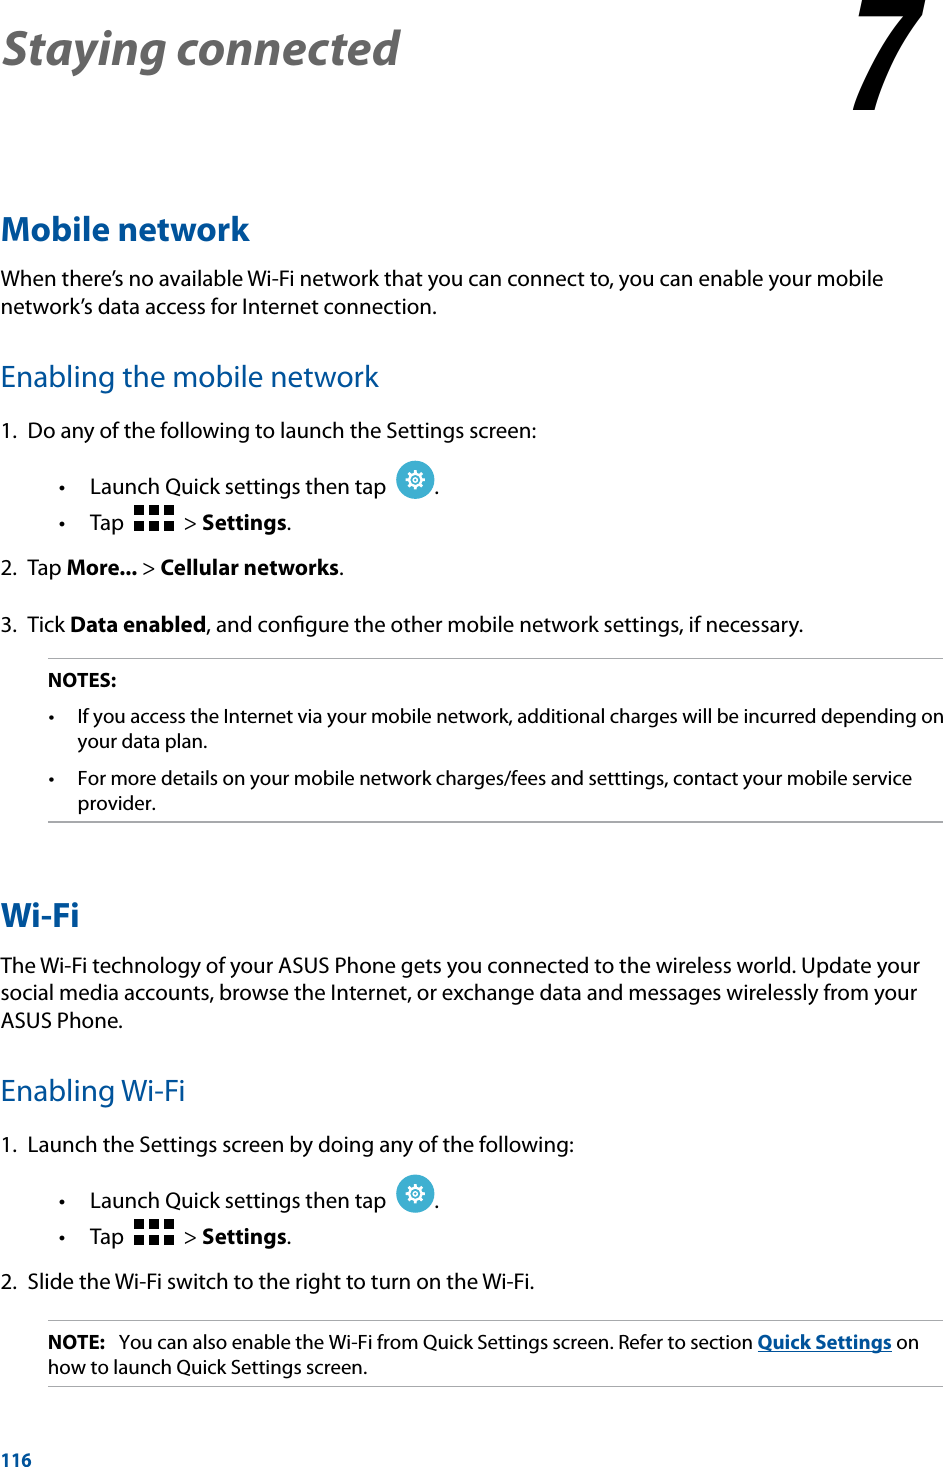 116Staying connected 77  Staying connectedMobile networkWhen there’s no available Wi-Fi network that you can connect to, you can enable your mobile network’s data access for Internet connection.Enabling the mobile network1.  Do any of the following to launch the Settings screen: •Launch Quick settings then tap   .   •Tap     &gt; Settings.2. Tap More... &gt; Cellular networks.3. Tick Data enabled, and conﬁgure the other mobile network settings, if necessary.NOTES: • IfyouaccesstheInternetviayourmobilenetwork,additionalchargeswillbeincurreddependingonyour data plan.• Formoredetailsonyourmobilenetworkcharges/feesandsetttings,contactyourmobileserviceprovider.Wi-FiThe Wi-Fi technology of your ASUS Phone gets you connected to the wireless world. Update your social media accounts, browse the Internet, or exchange data and messages wirelessly from your ASUS Phone.Enabling Wi-Fi1.  Launch the Settings screen by doing any of the following: •Launch Quick settings then tap   .   •Tap     &gt; Settings.2.  Slide the Wi-Fi switch to the right to turn on the Wi-Fi.NOTE:   You can also enable the Wi-Fi from Quick Settings screen. Refer to section Quick Settings on how to launch Quick Settings screen.